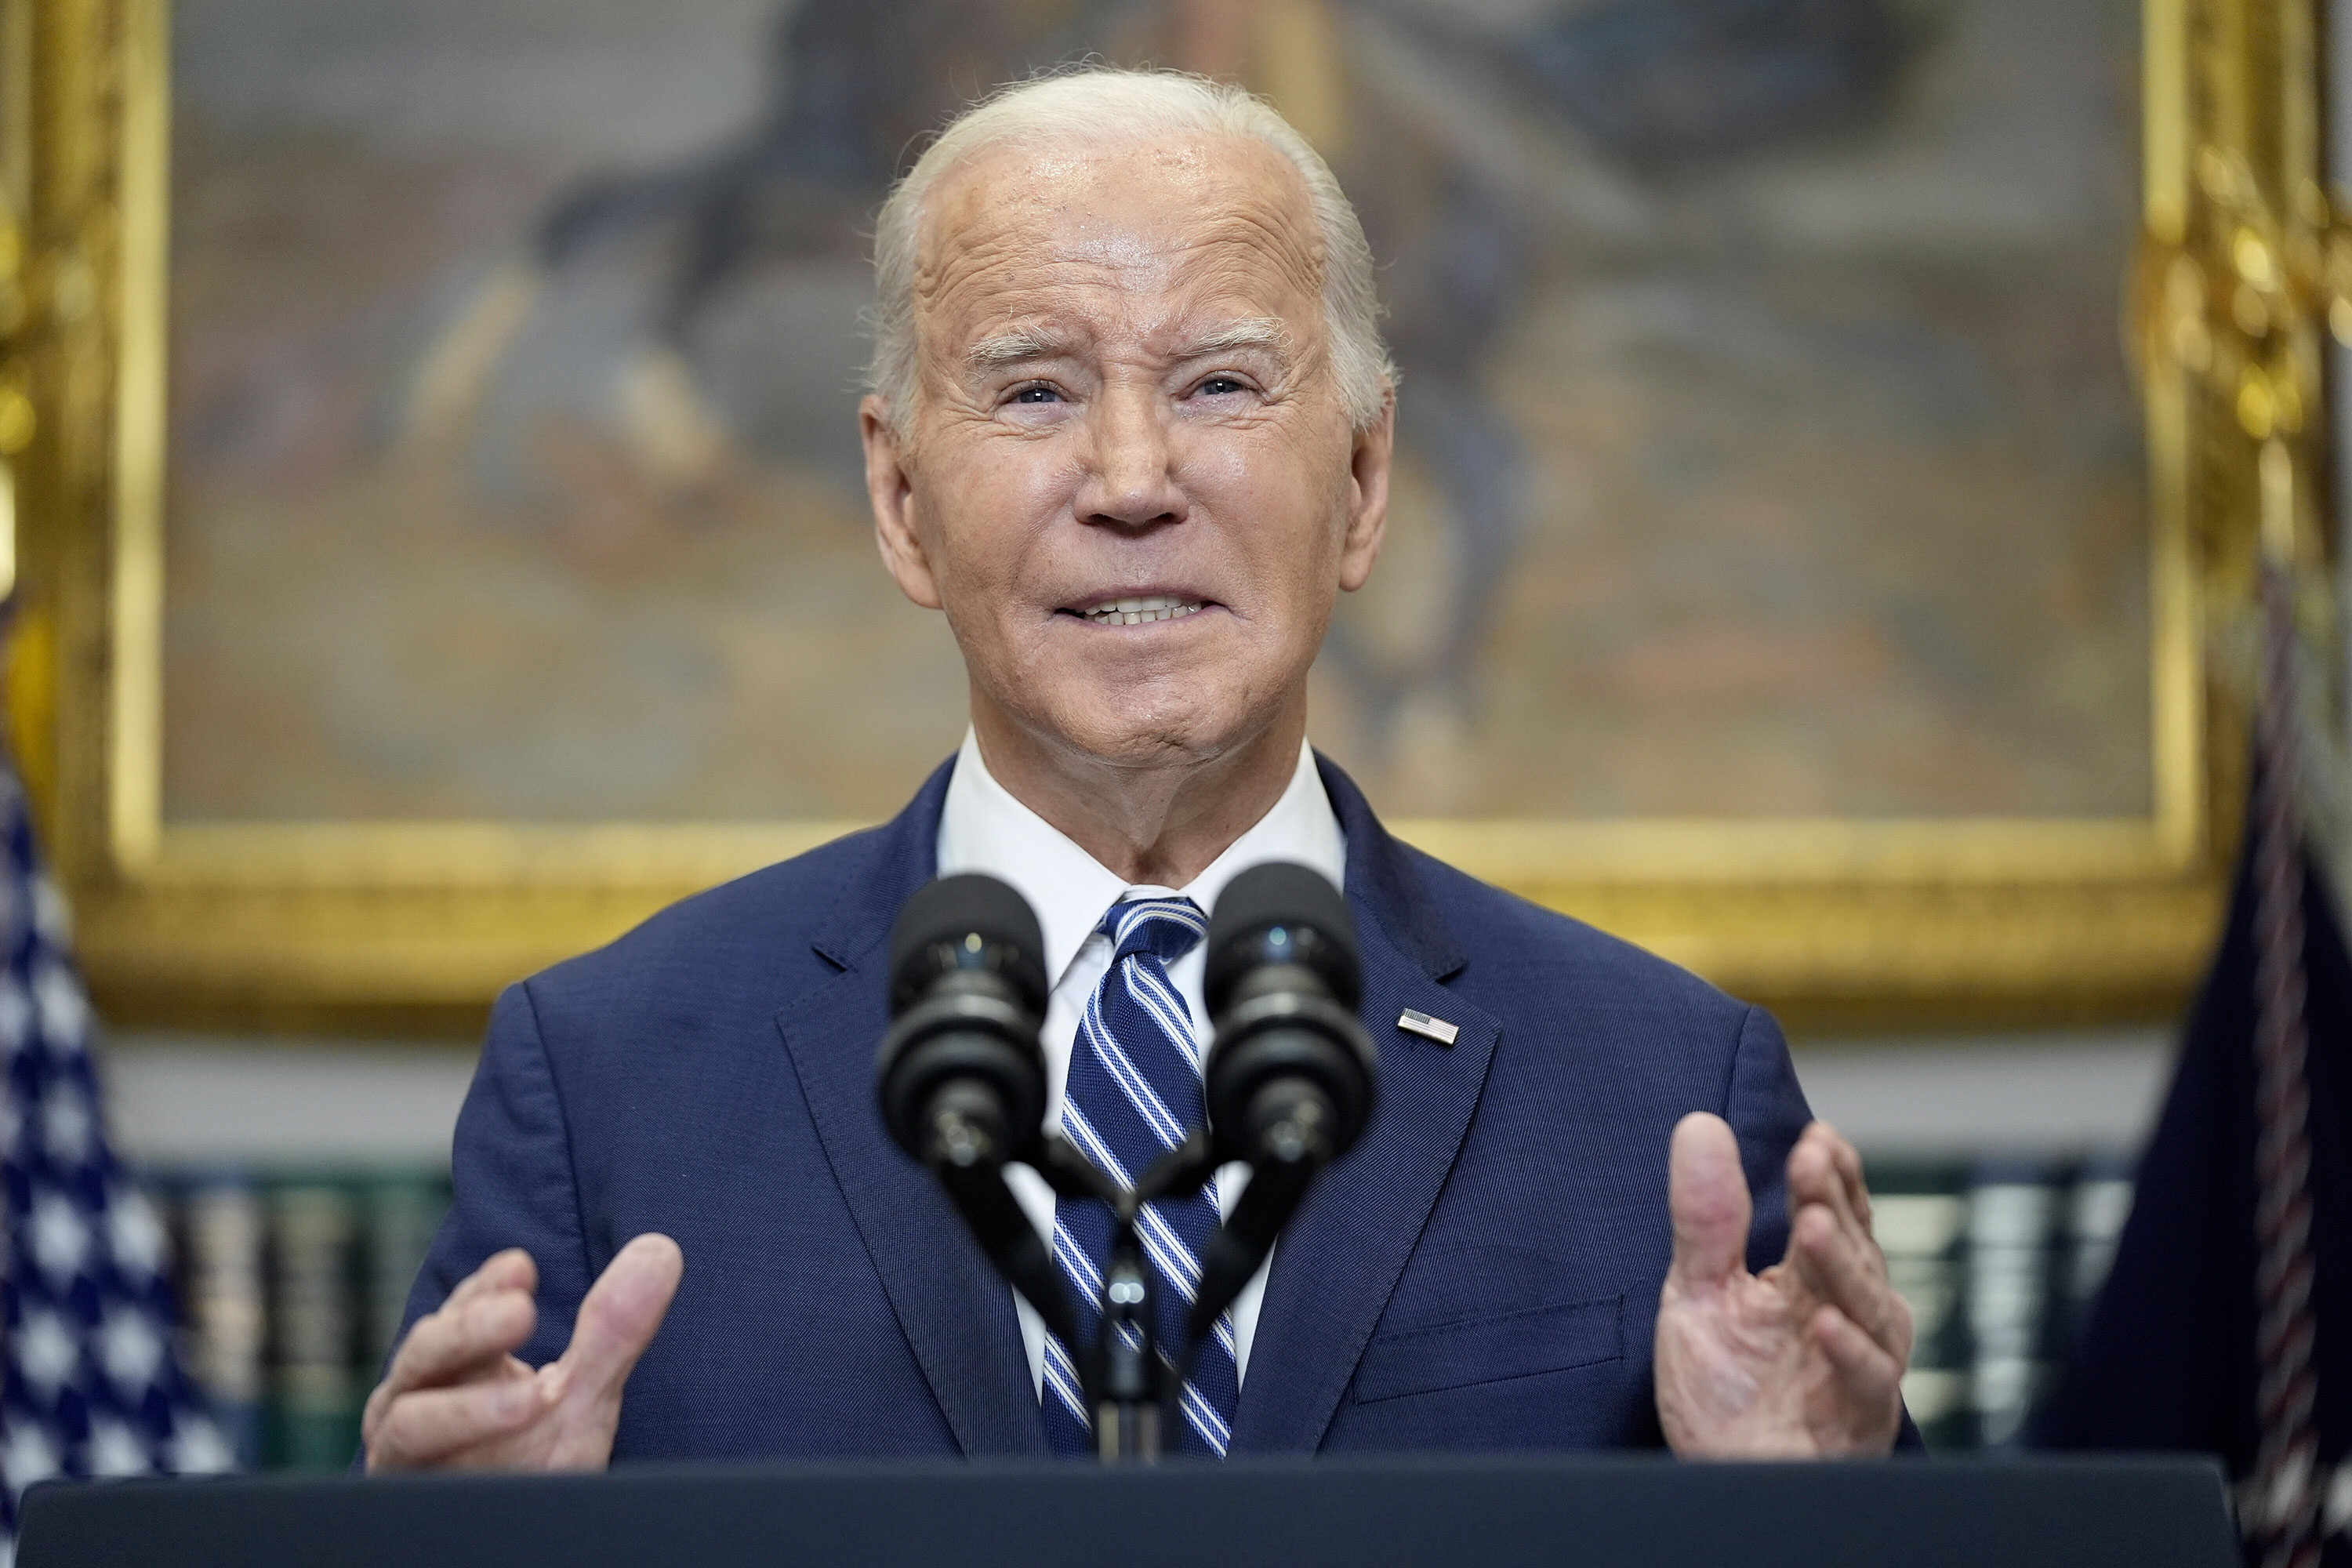 President Joe Biden delivers remarks on the death of Alexey Navalny in the Roosevelt Room of the White House on Friday.